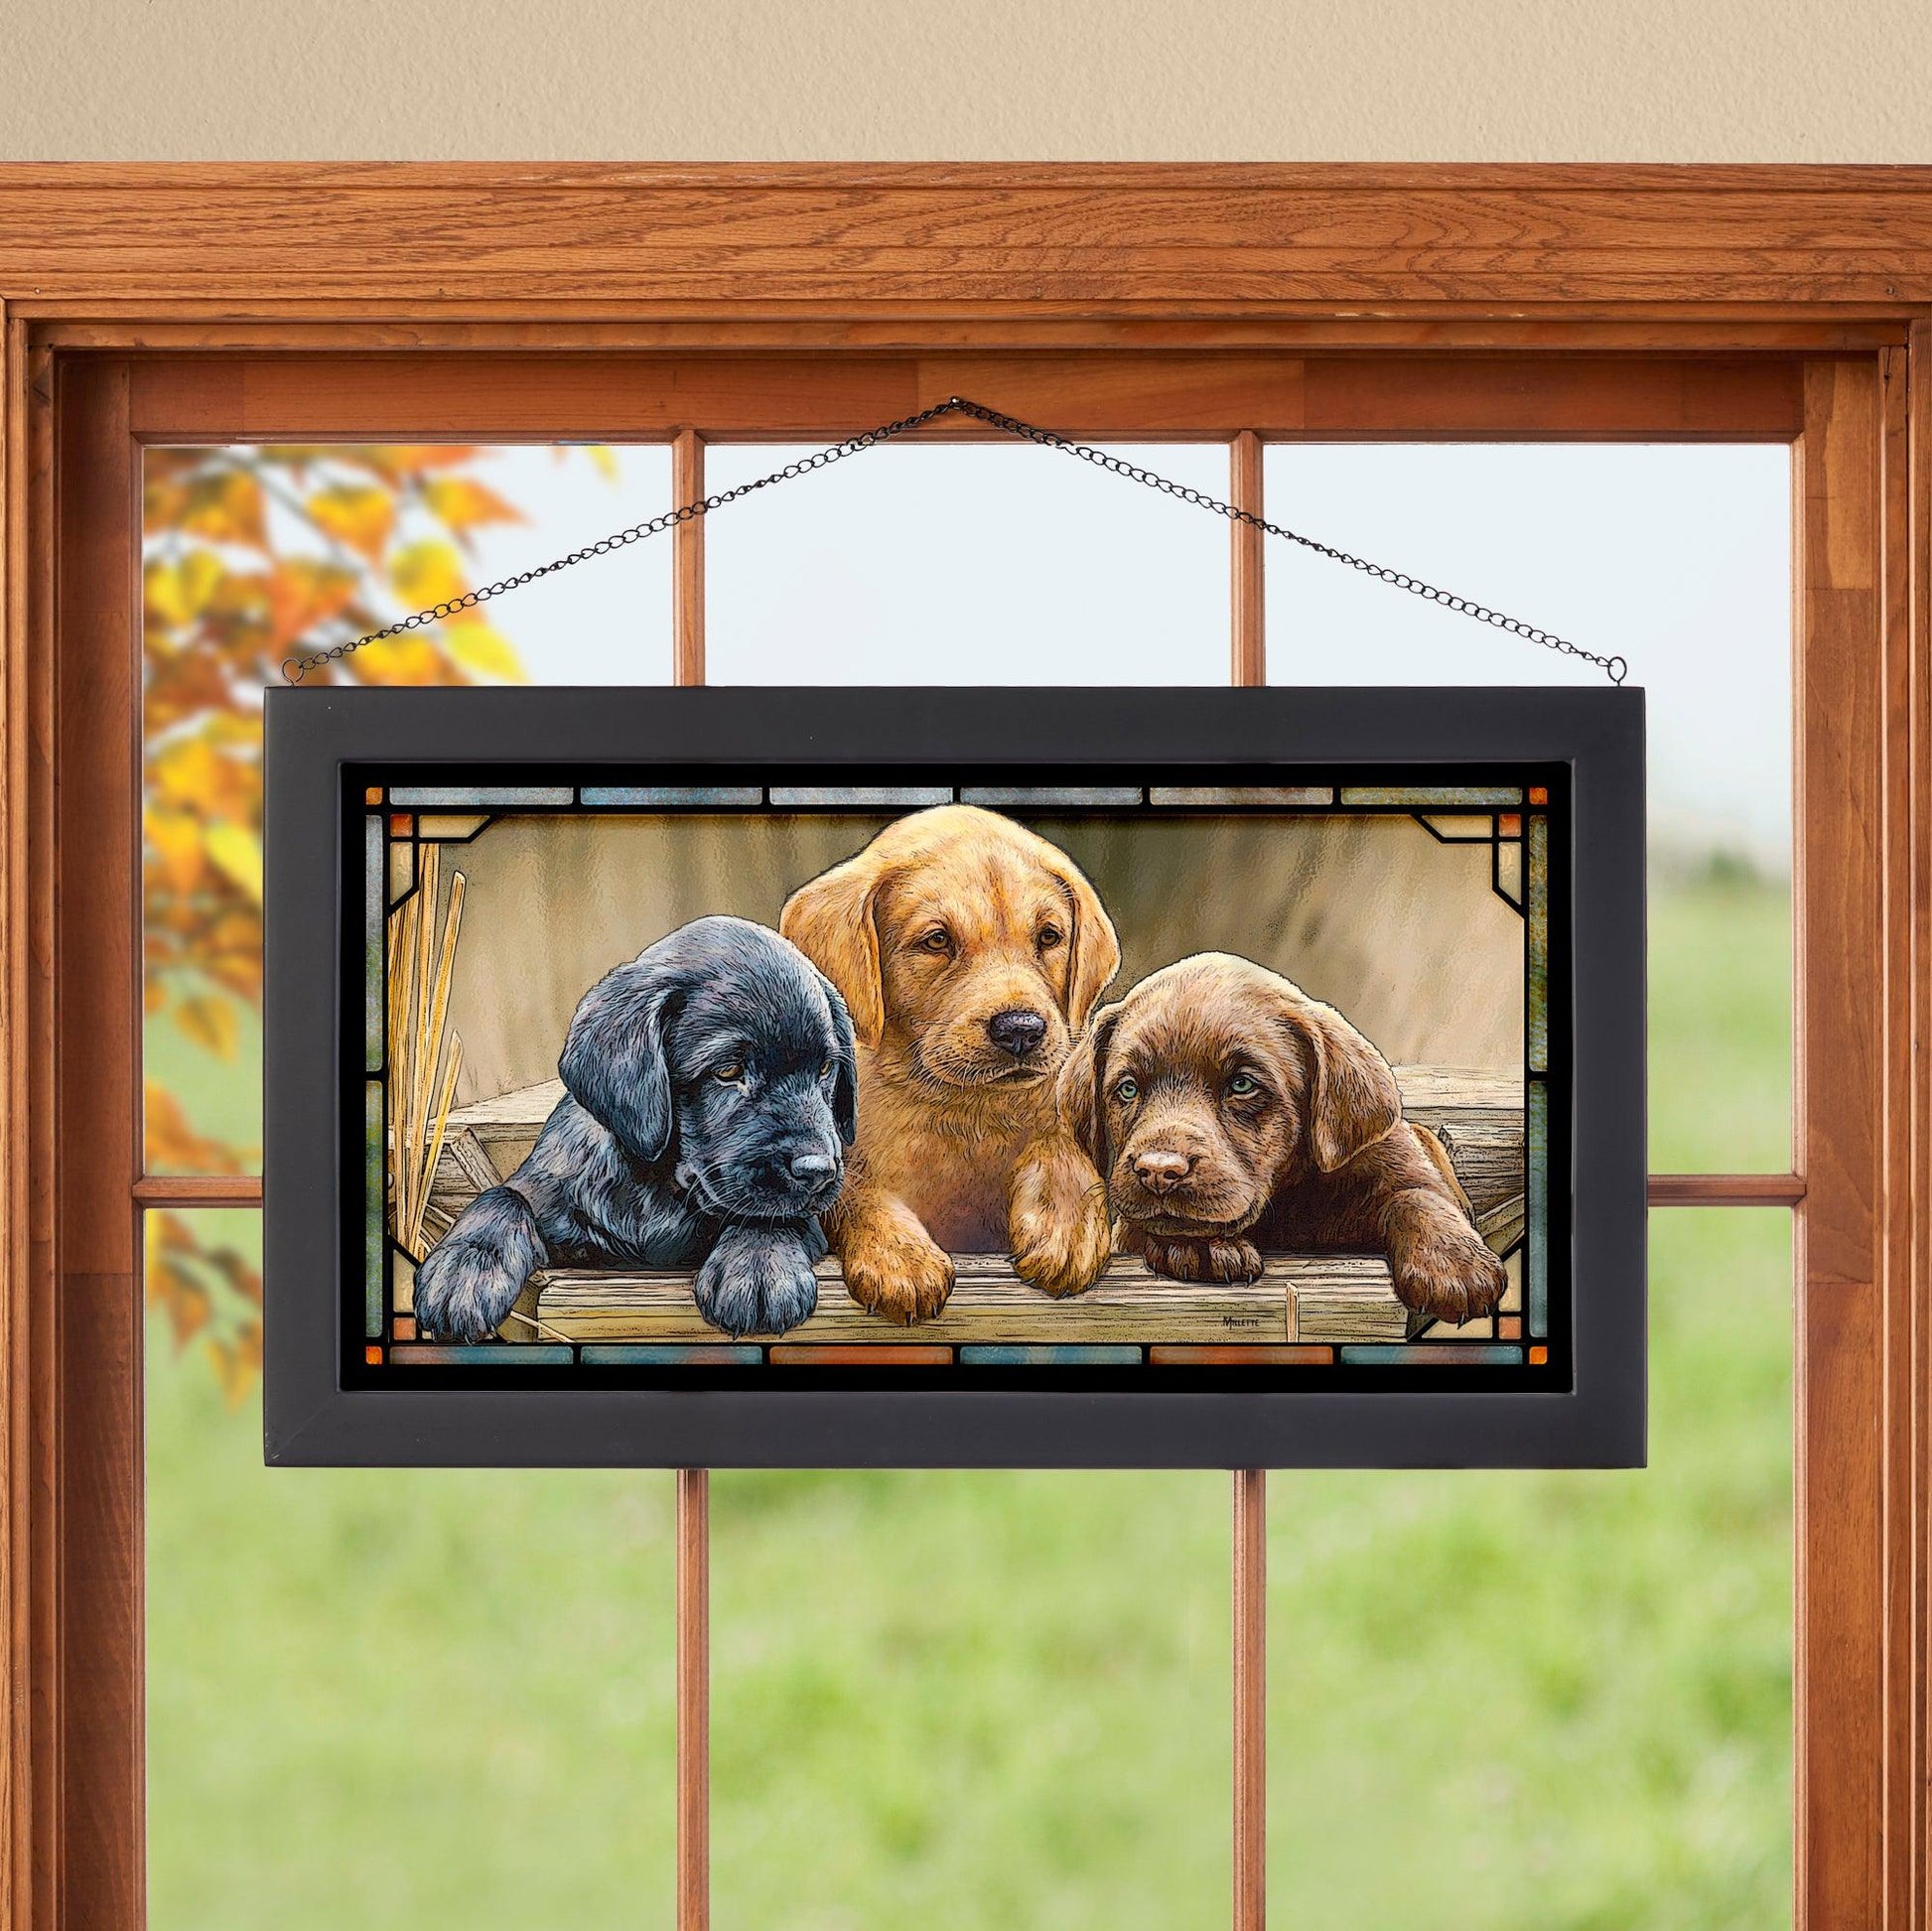 All Hands on Deck - Lab Puppies Stained Glass Art - Wild Wings